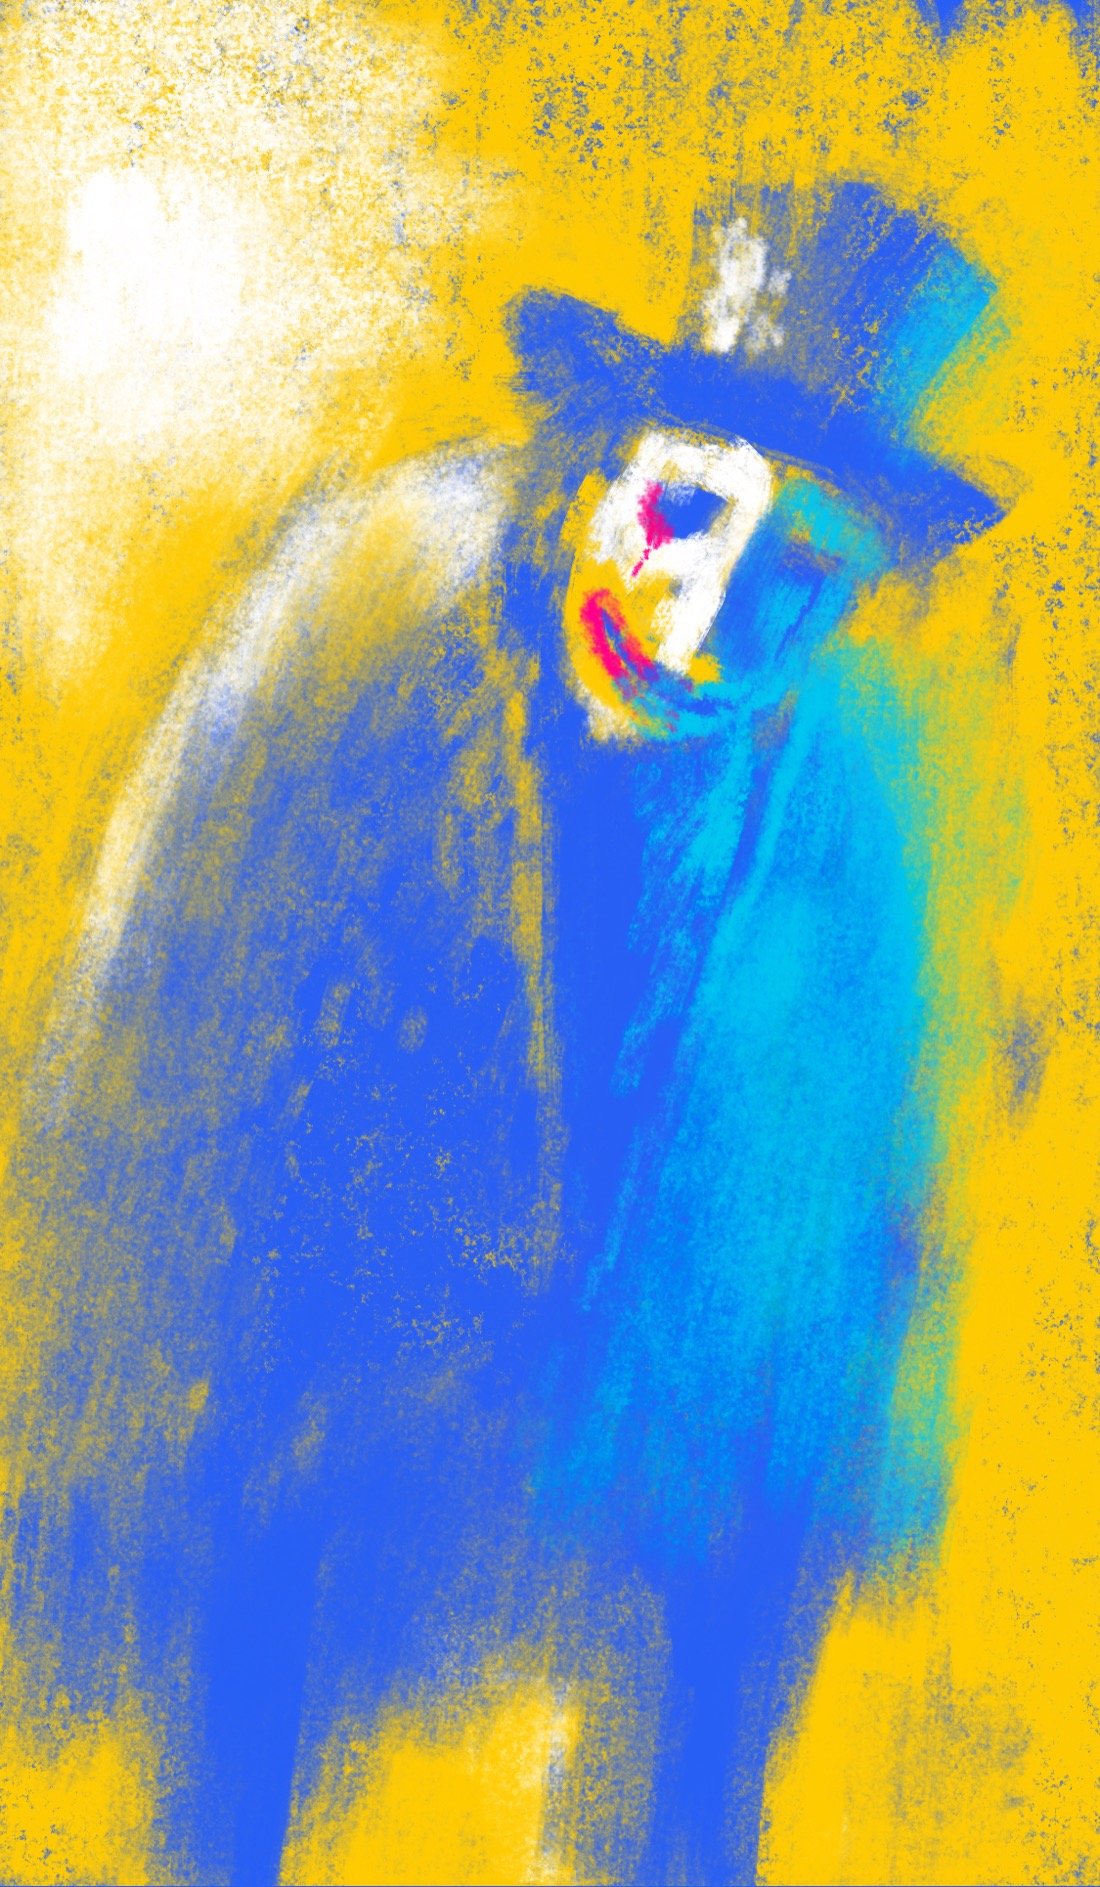 A person wearing a long cloak and top hat stands near a light. The person's face is disturbingly clownish, with garish pink makeup on their lips and eyes. The person appears to loom towards the viewer. The drawing looks like it is rendered in oil; the texture is rough, the details blurry. The background of the drawing is yellow, and the figure is blue. The left side of the figure has white light reflecting off of it; the right side has a bluish-green tint, as though reflecting a pale green light from somewhere else.